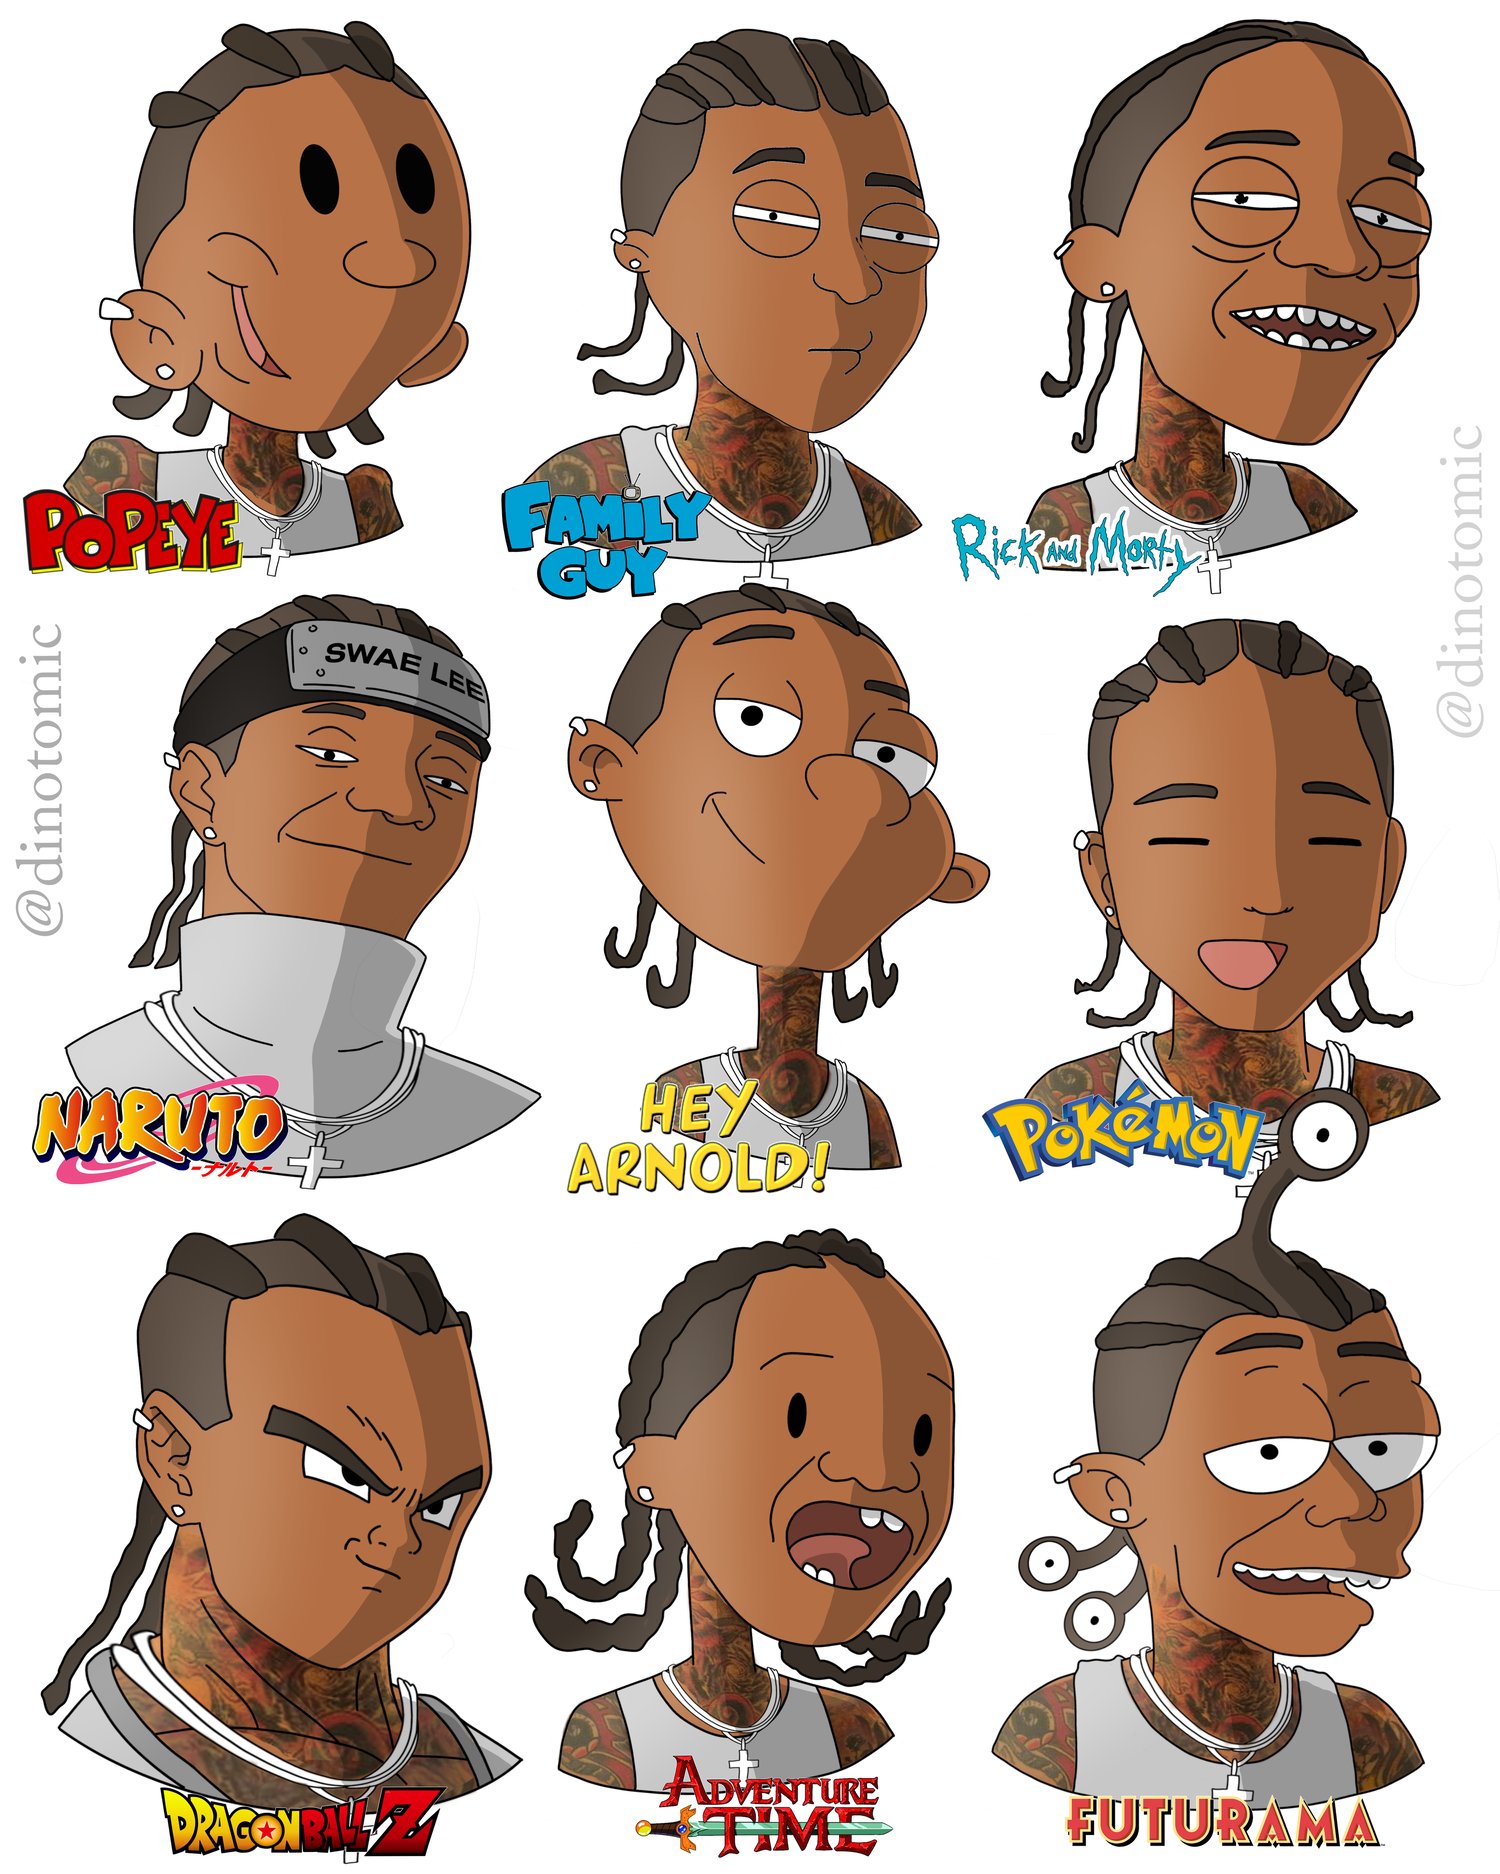 Image of #239 Swaelee in different styles 